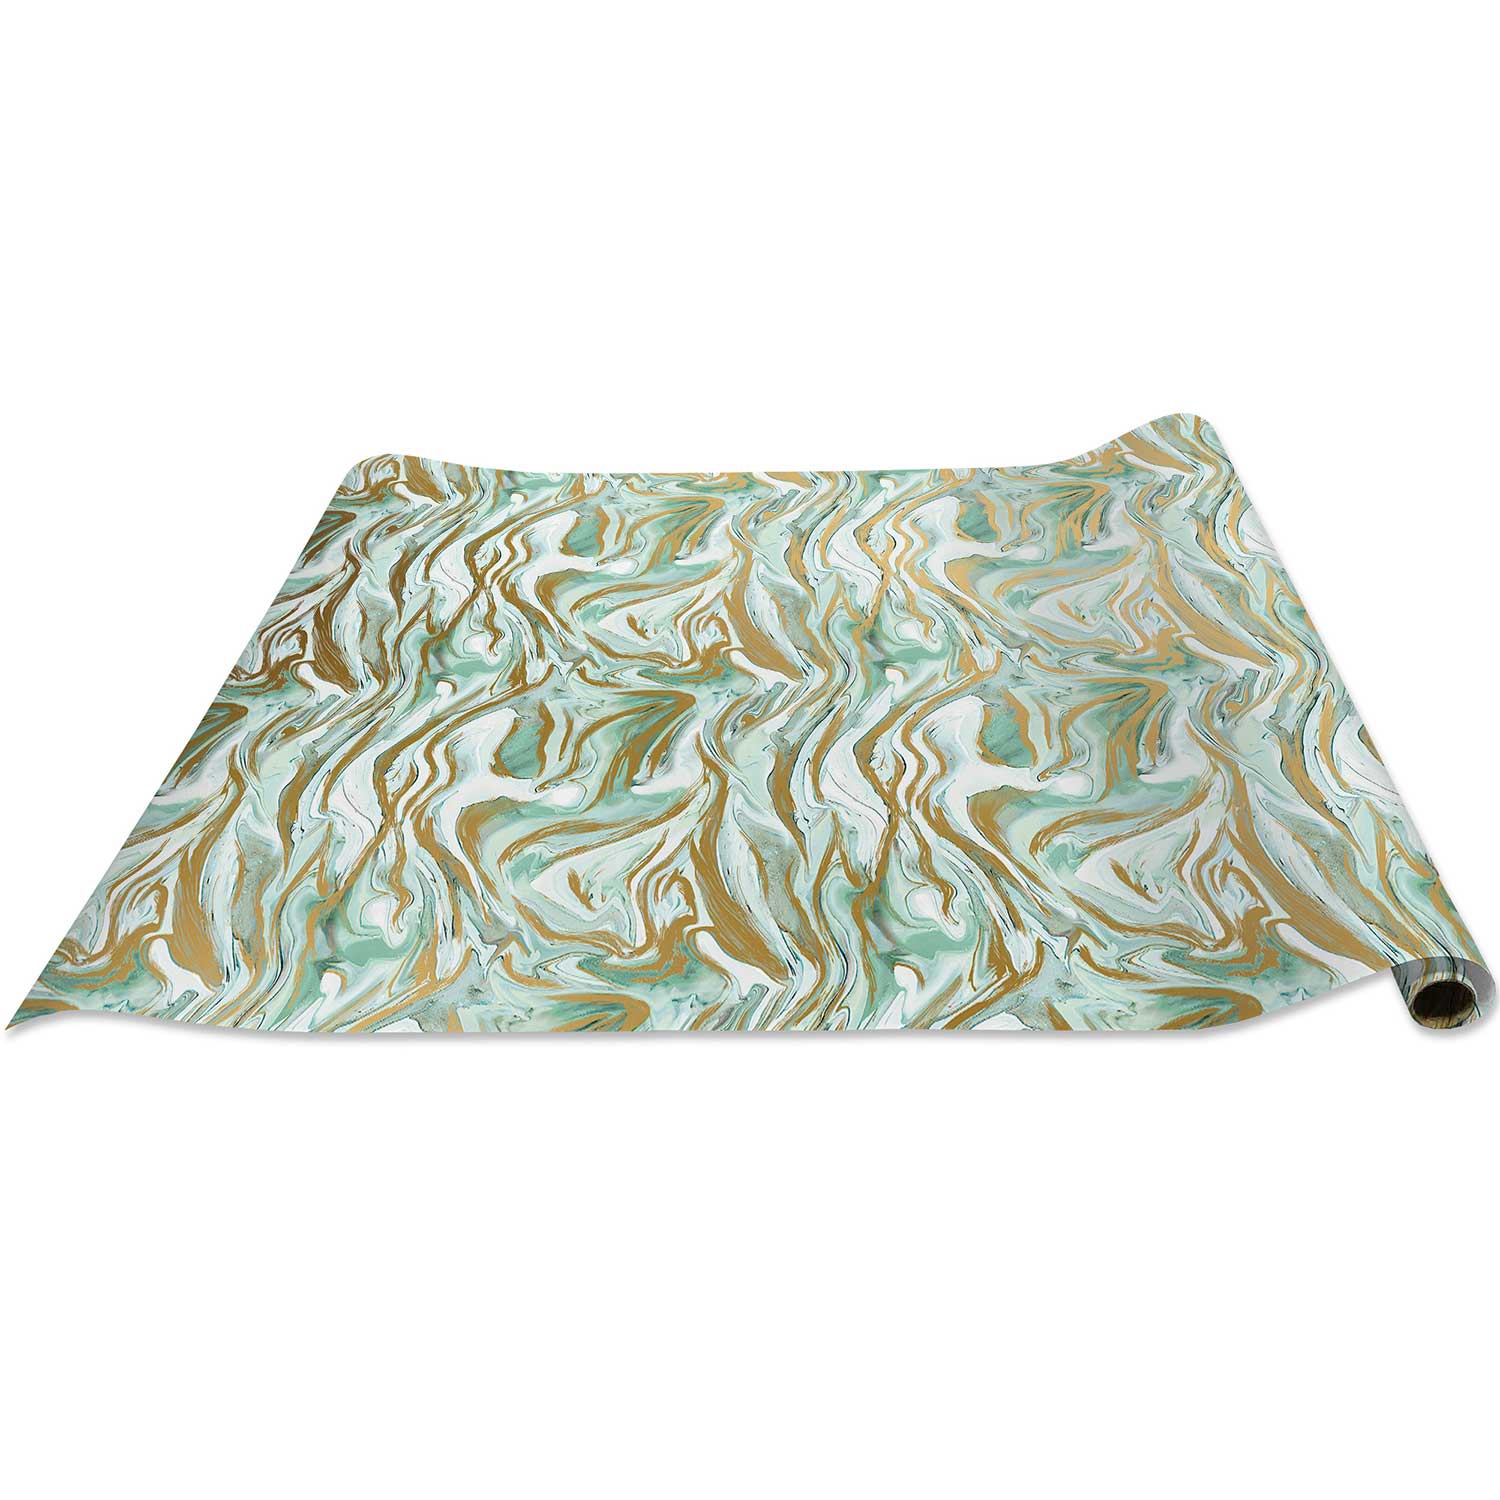 Marbleized Mint Gift Wrap | Present Paper, 1/2 Ream 417 ft x 24 in